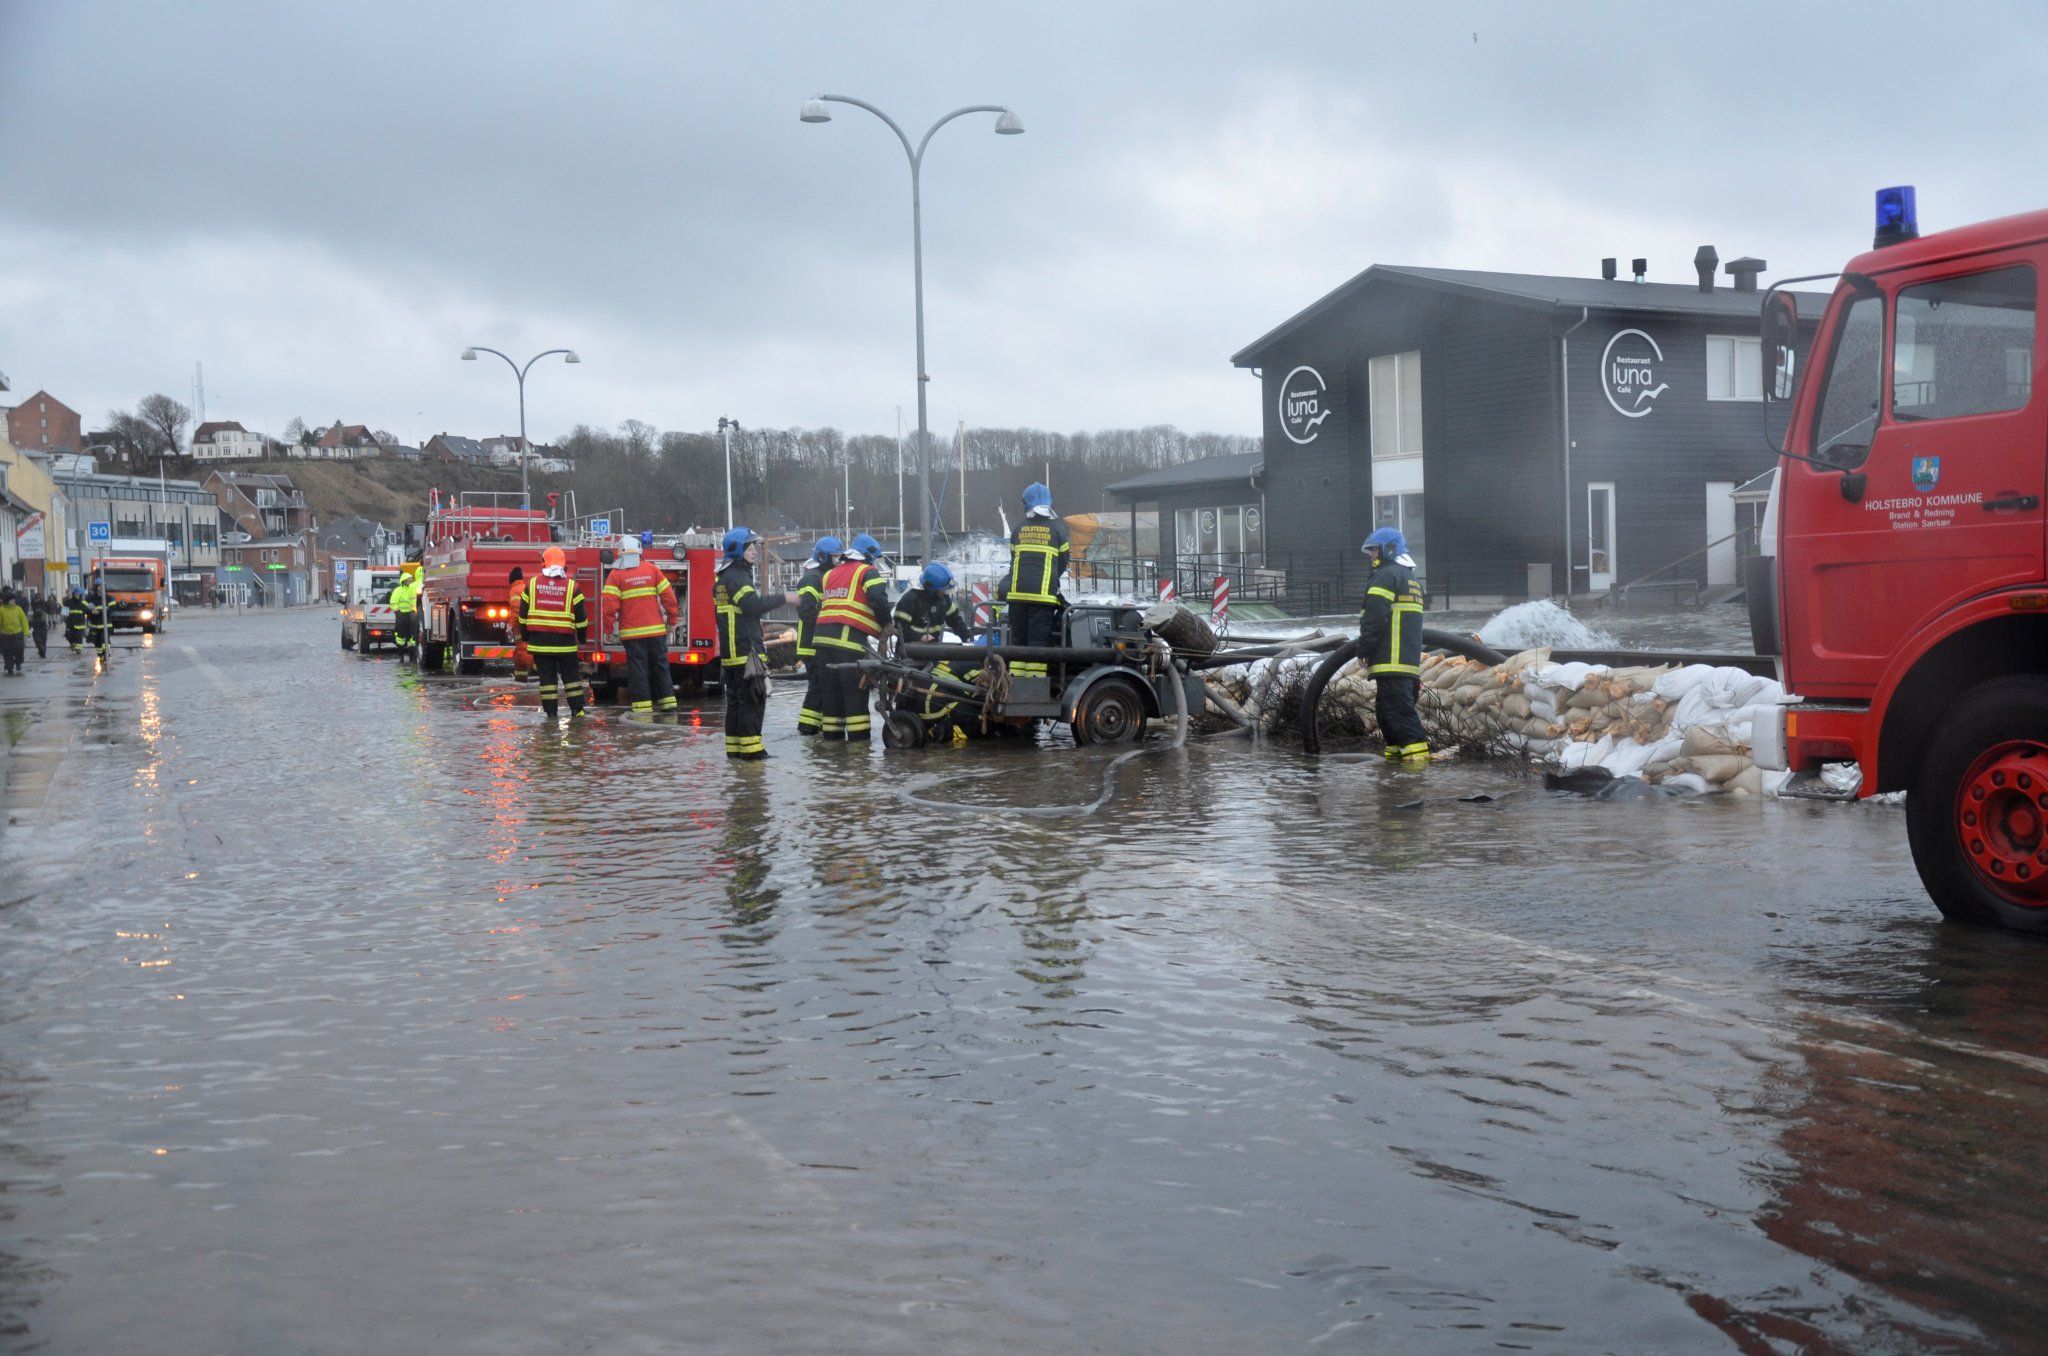 Flooding in Denmark becoming the norm